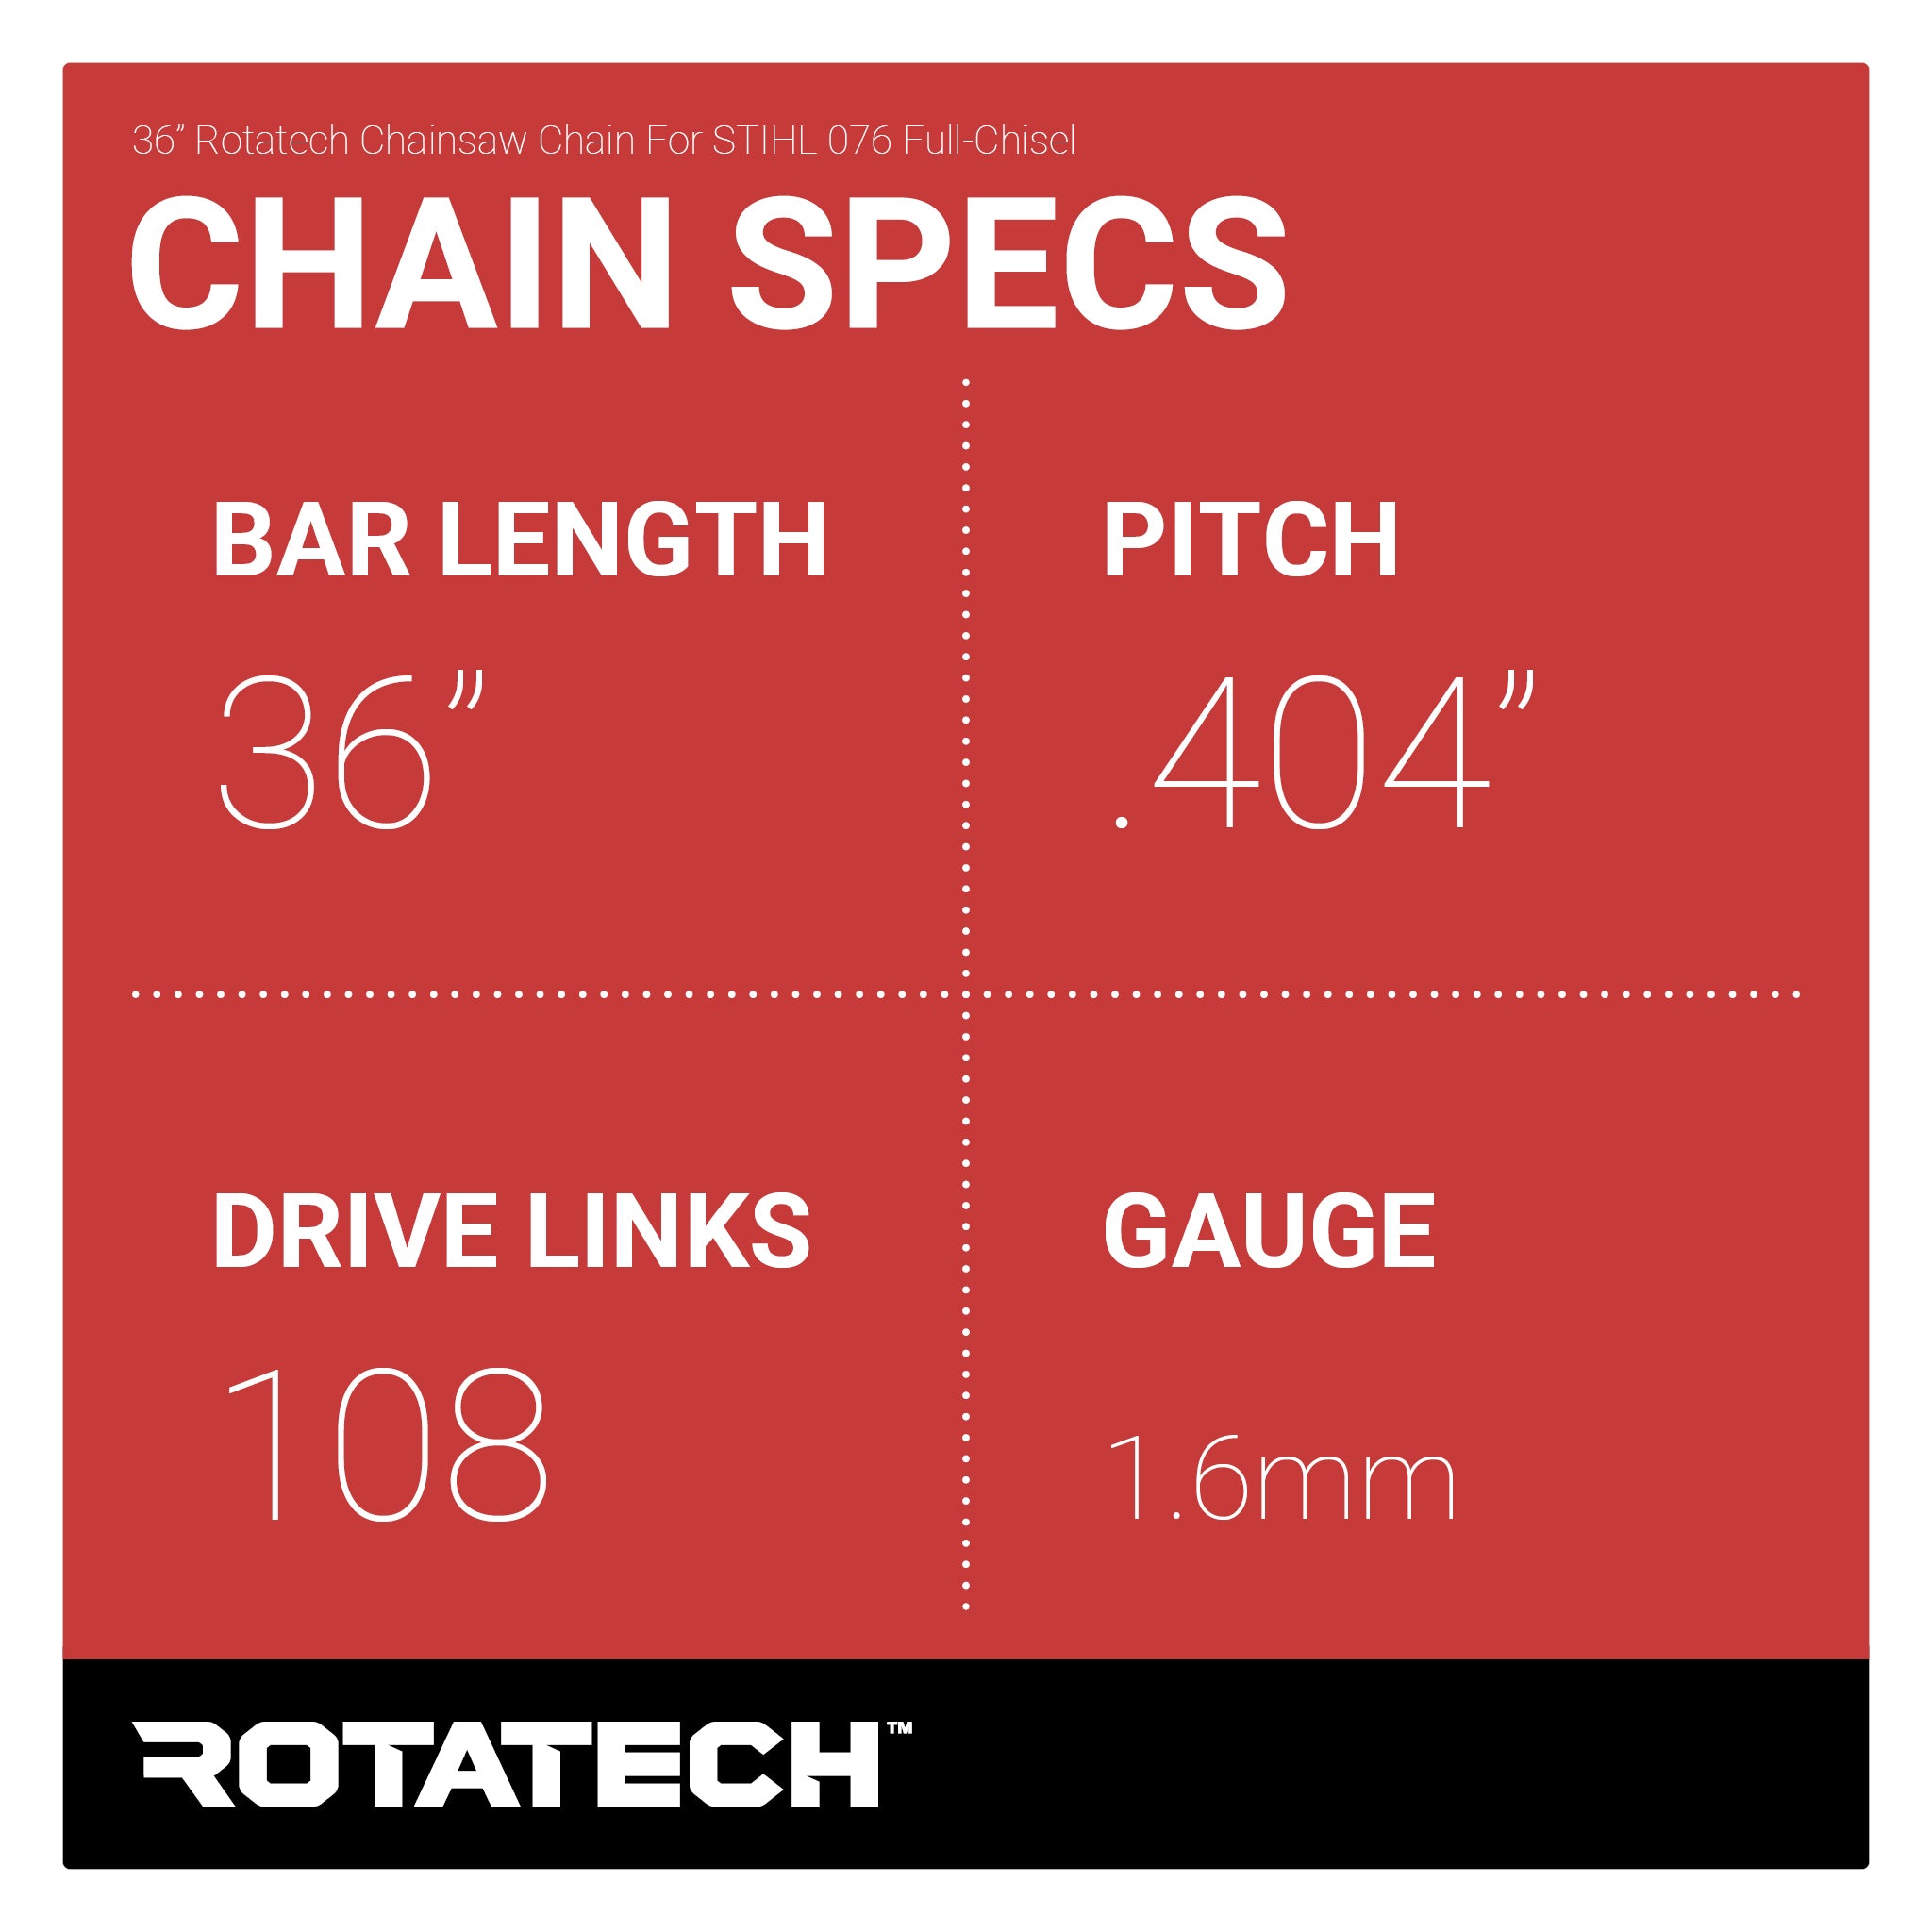 36" Rotatech Chainsaw Chain For STIHL 076 Full-Chisel Chain Specs